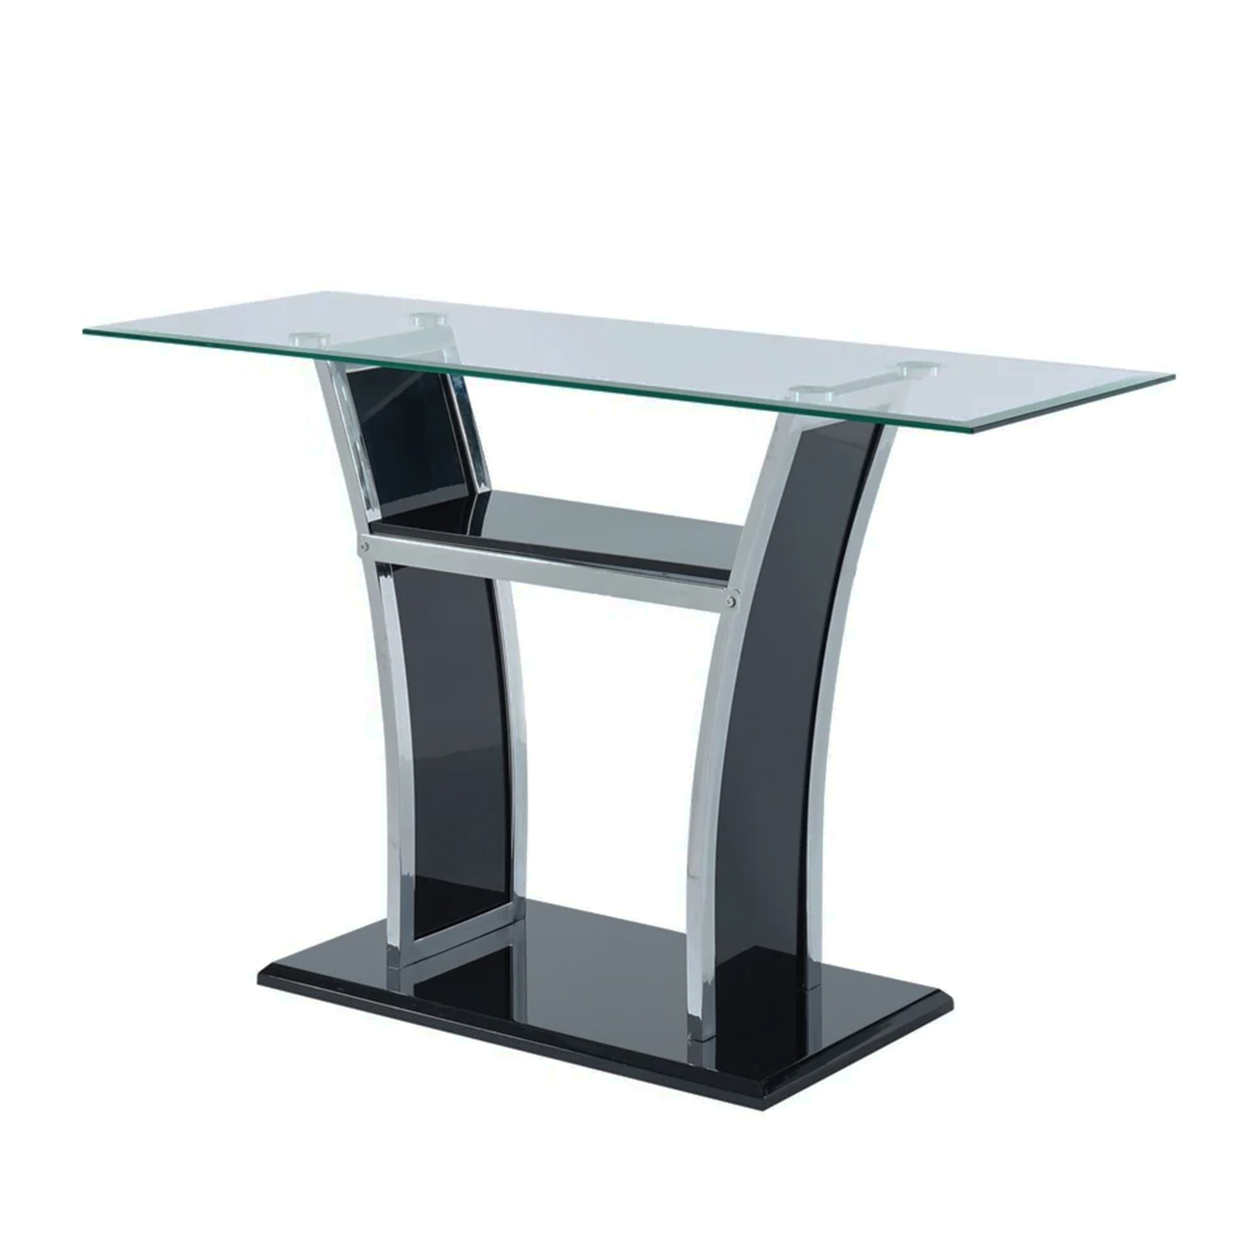 Sofa Table With Chrome Trimmed Curved Sides And Open Bottom Shelf, Black- Saltoro Sherpi